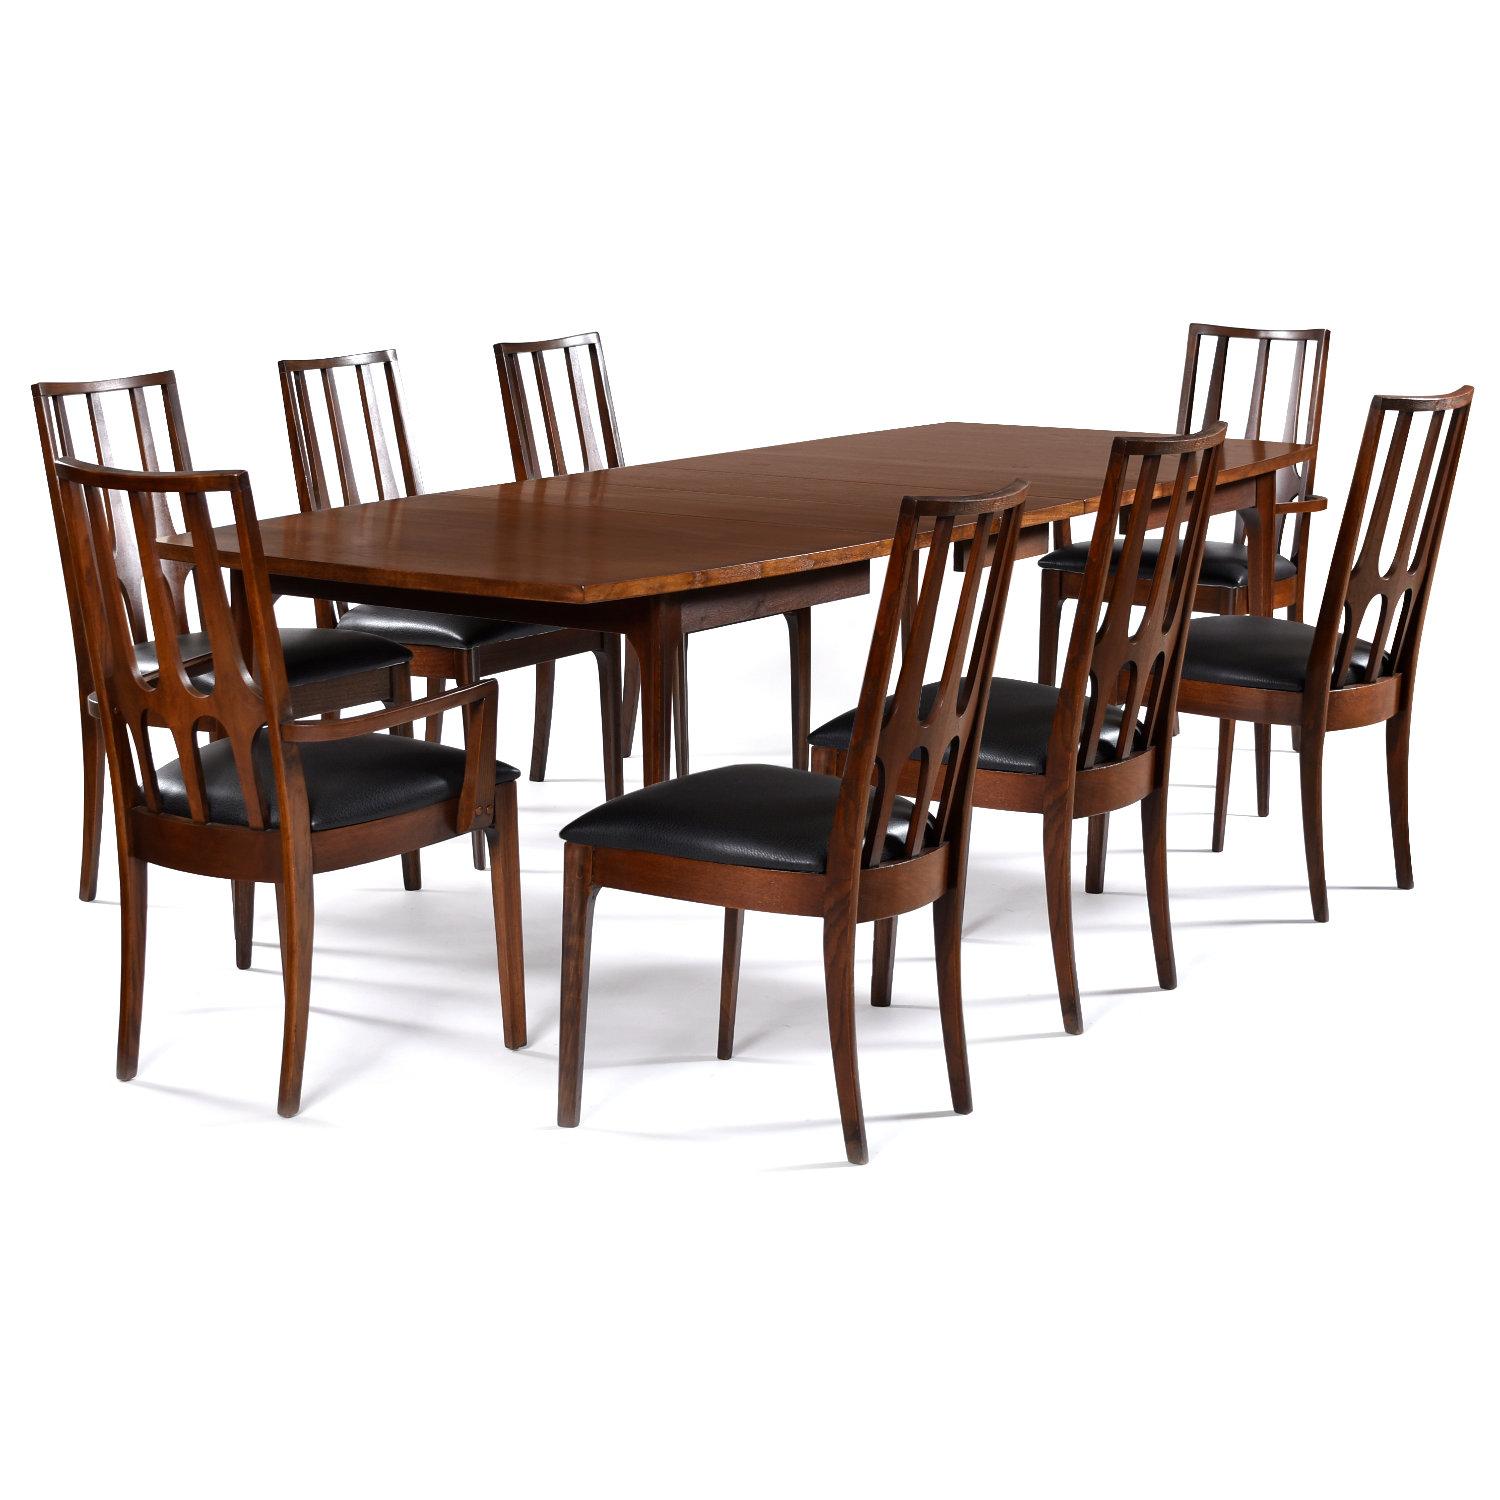 Beautifully restored Broyhill Brasilia dining set. This sought after Mid-Century Modern walnut dining set includes an expanding dining table and 8 dining chairs. The table is 66? long and expands out to a maximum 102? in length. Three 12? leaves are